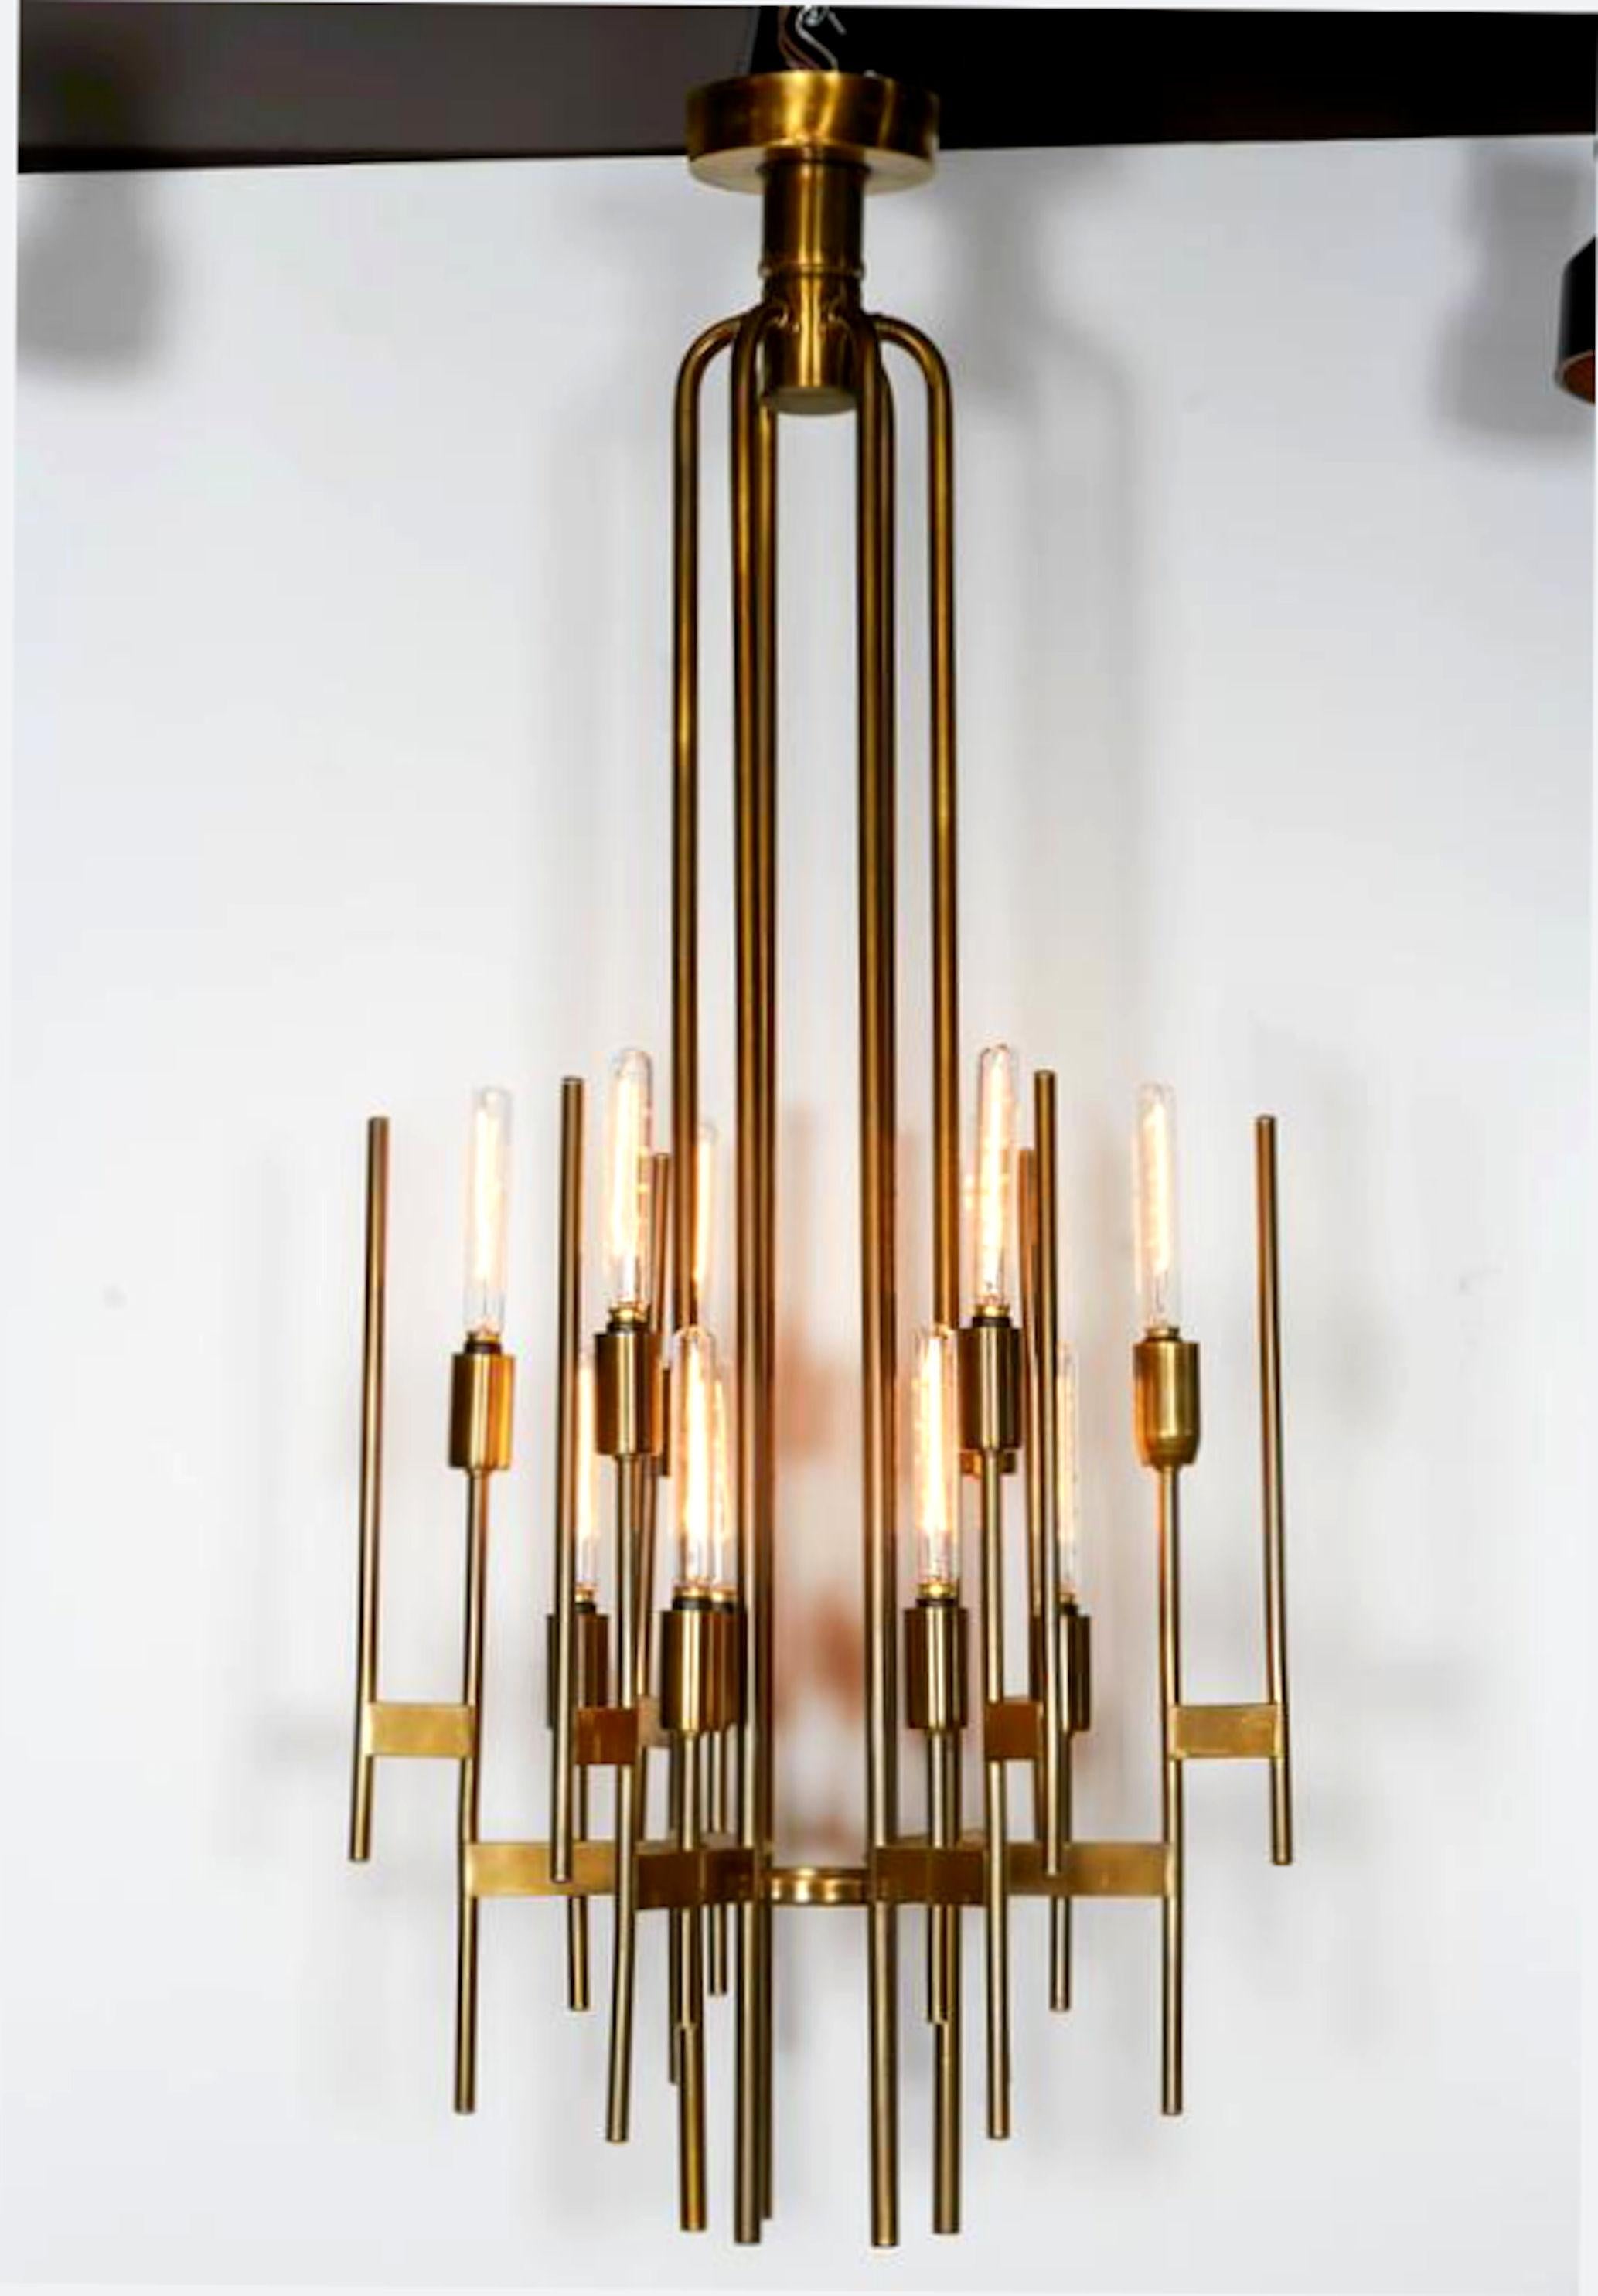 Italian Mid-Century Modern sculptural brass chandelier, by Gaetano Sciolari, Italy, 1960s.
Art Deco inspired design.
12 lights, rewired for the US. Shown with filament bulbs, not included.
Beautiful original patina.
Modern, Mid Century Modern,